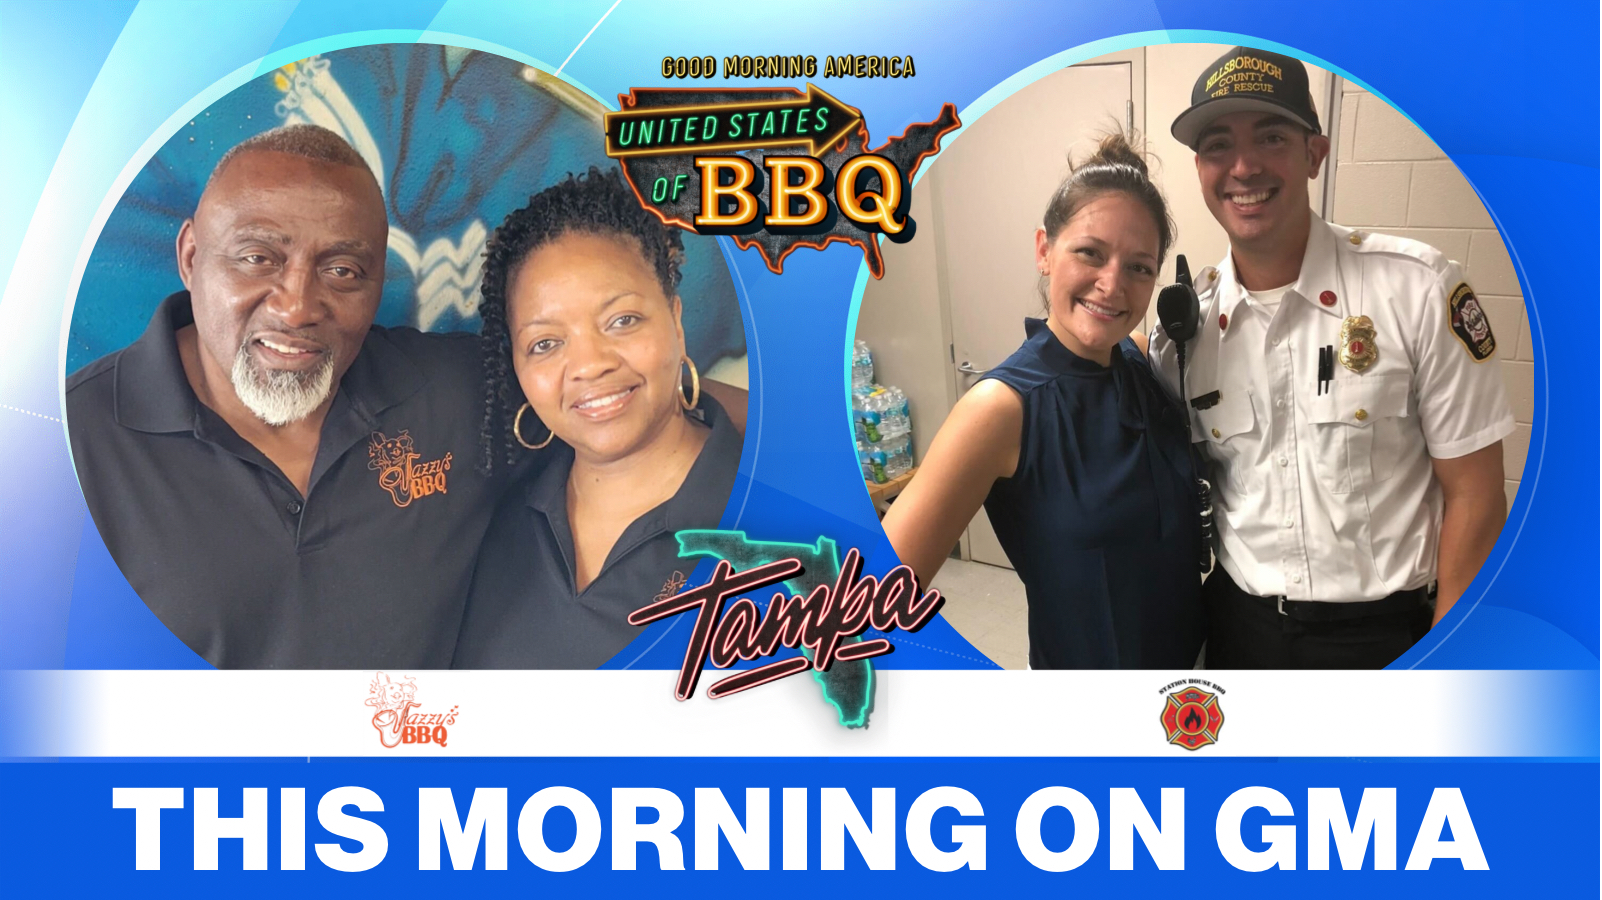 PHOTO: Jazzy's BBQ and Station House BBQ will compete on "GMA" for the ultimate pit master title.